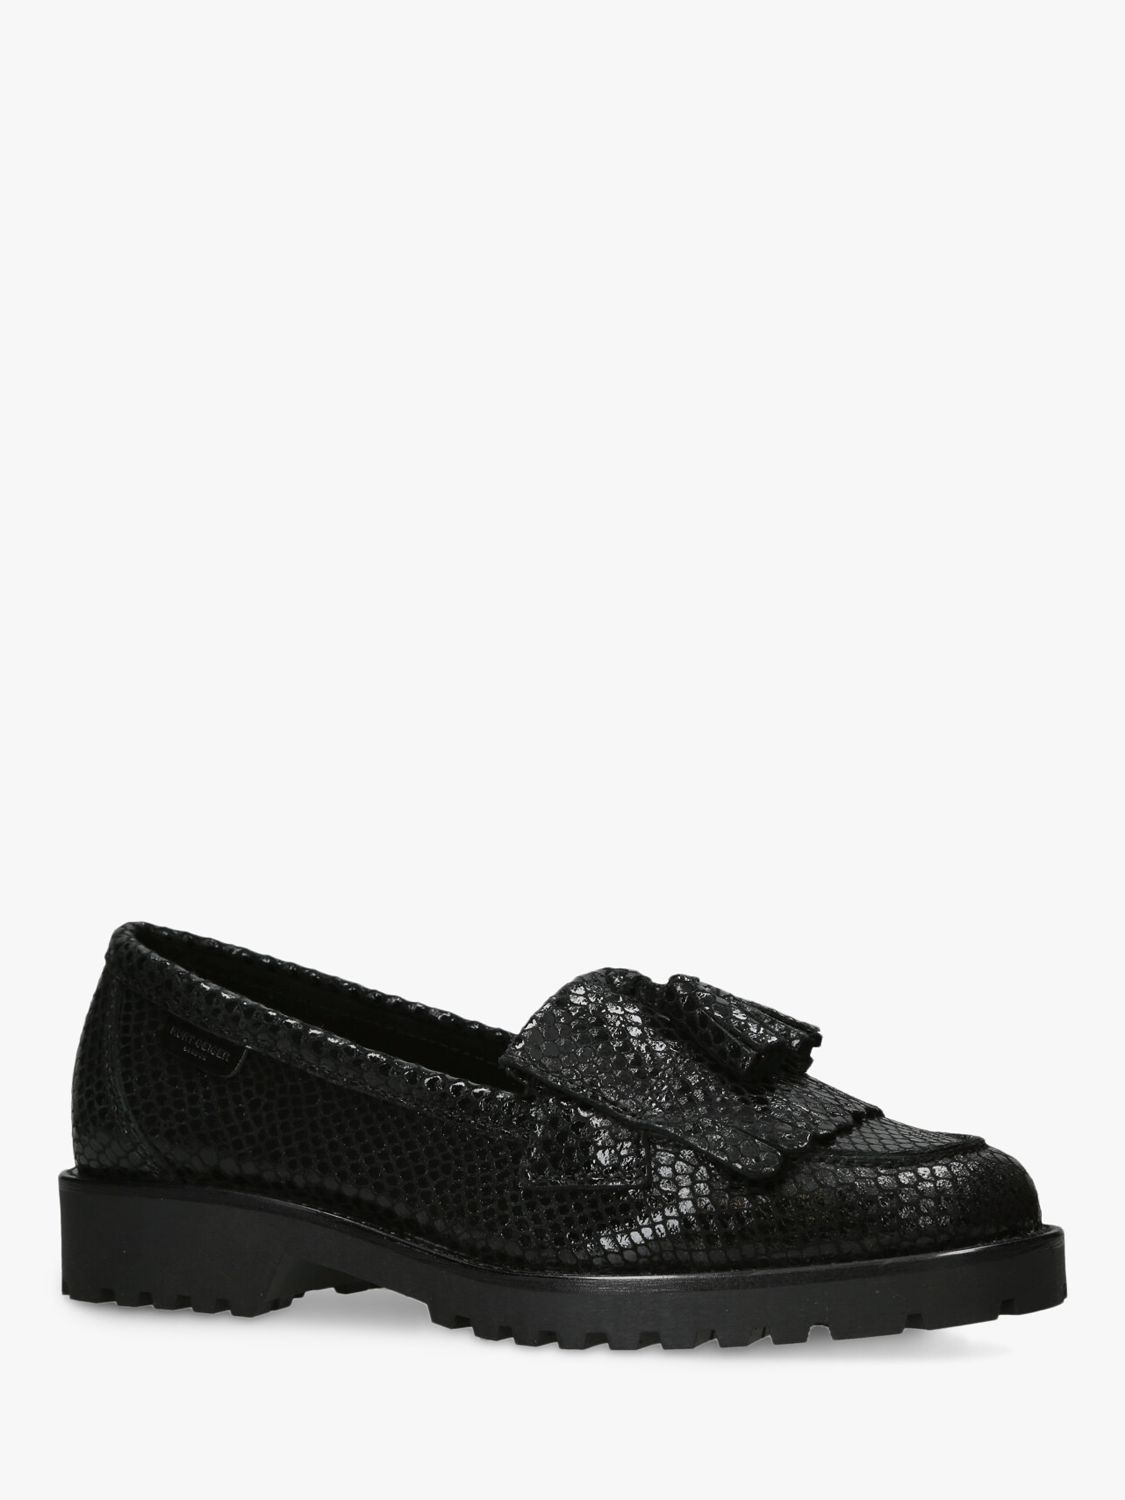 Kurt Geiger London Olympia Leather Loafers at John Lewis & Partners